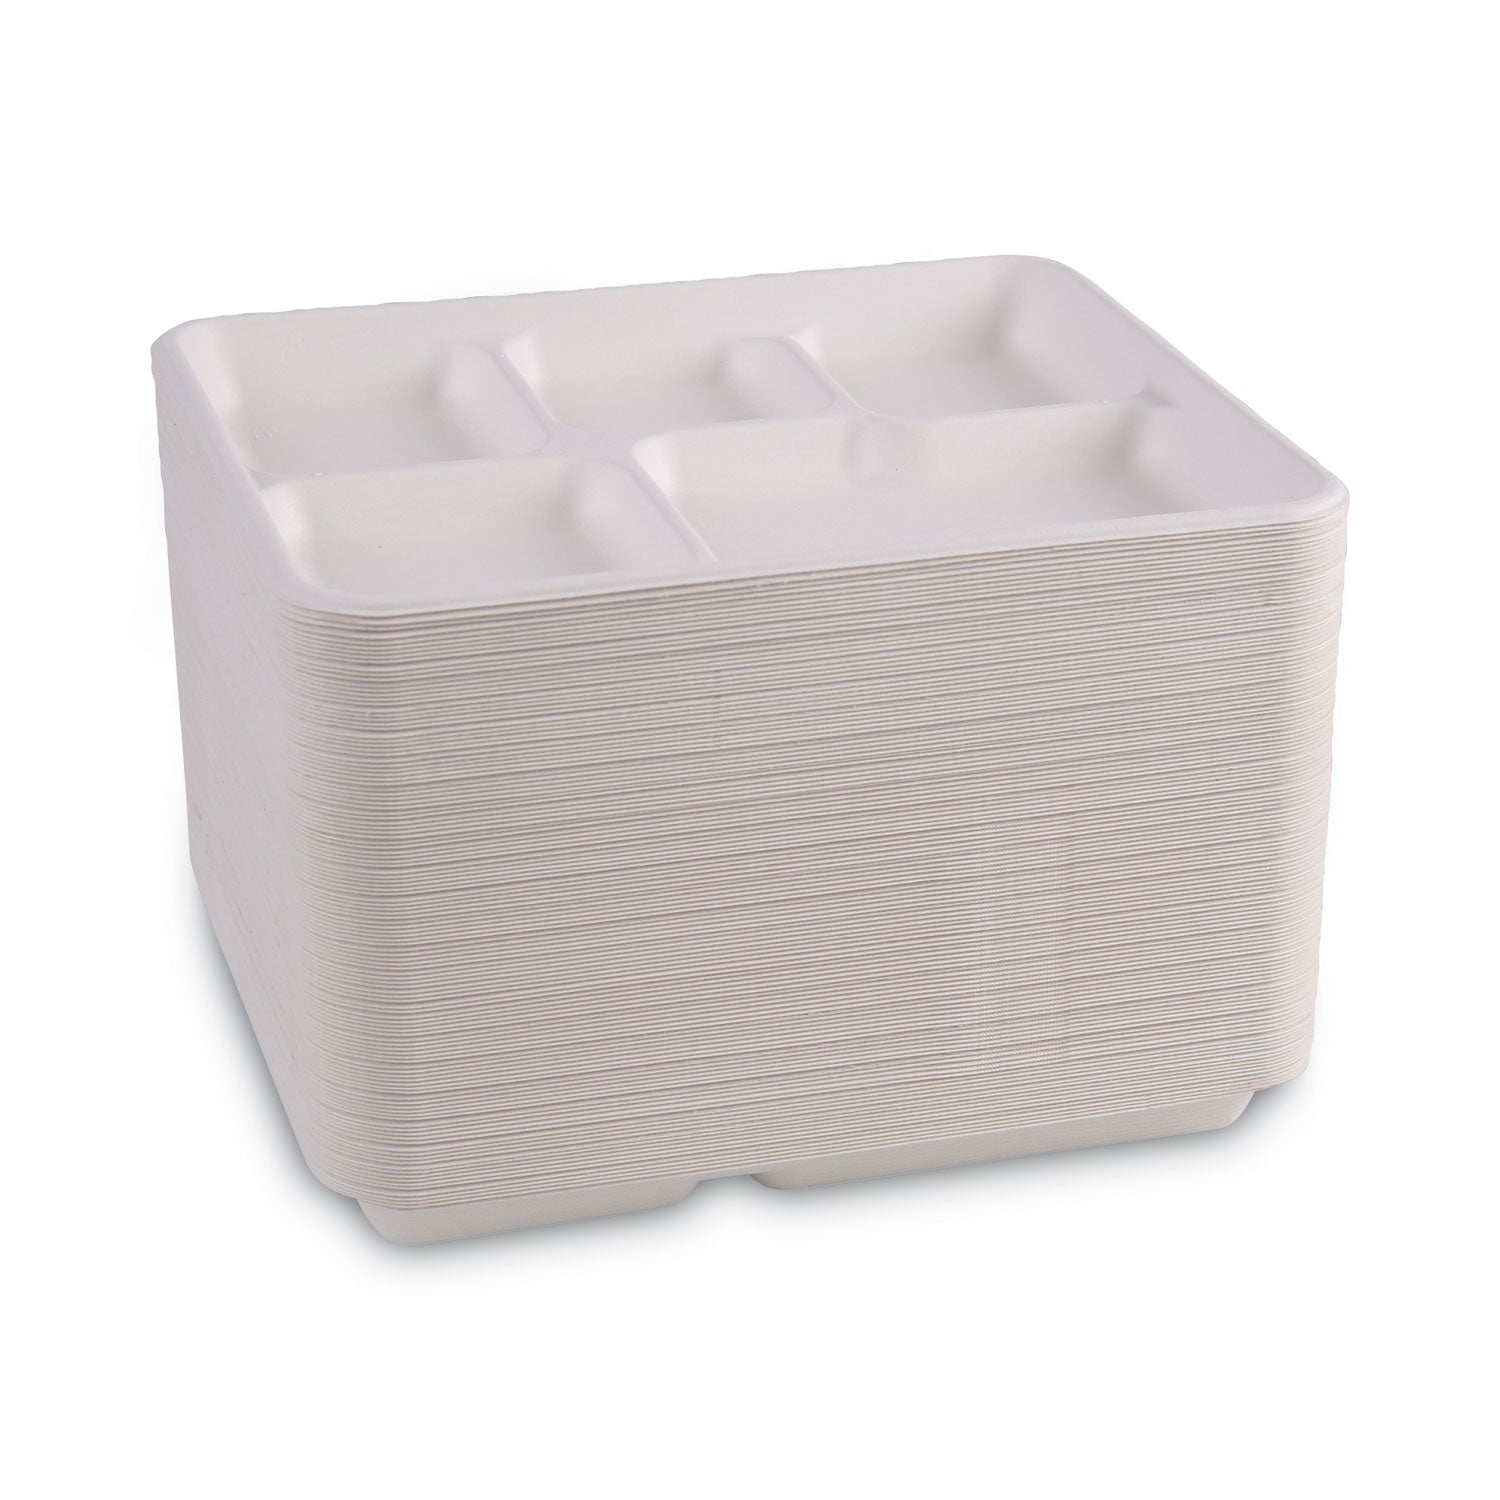 bagasse-dinnerware-5-compartment-tray-10-x-8-white-500-carton_bwktraywf128 - 2